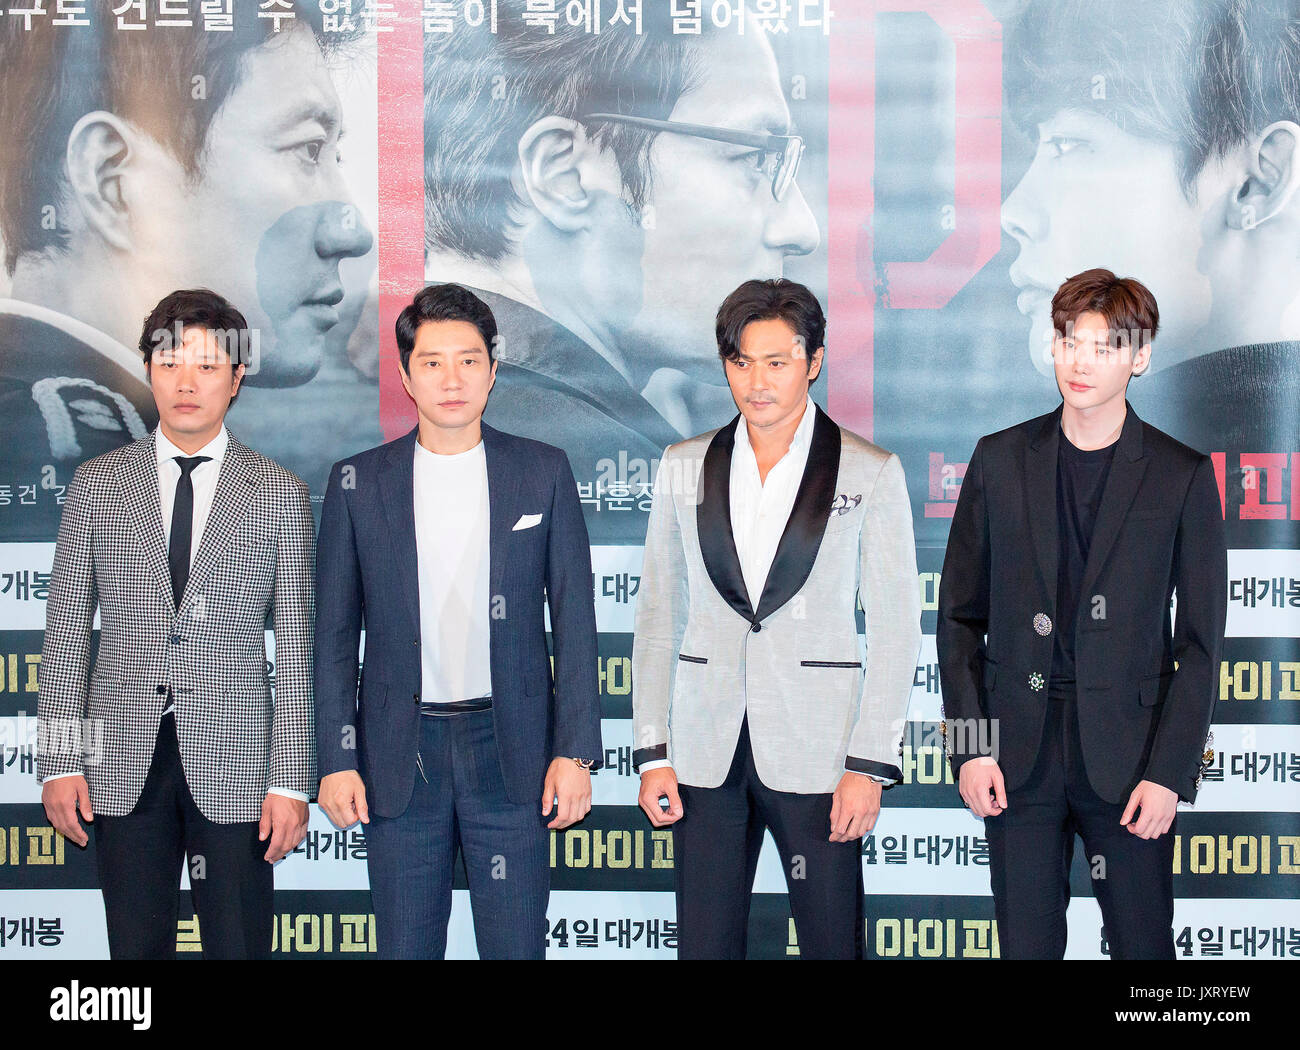 Park Hee-soon, Kim Myung-min, Jang Dong-gun and Lee Jong-suk, Aug 16, 2017 : (L-R) South Korean actors Park Hee-soon, Kim Myung-min, Jang Dong-gun and Lee Jong-suk pose after a press preview of their new movie, V.I.P. in Seoul, South Korea. Credit: Lee Jae-Won/AFLO/Alamy Live News Stock Photo